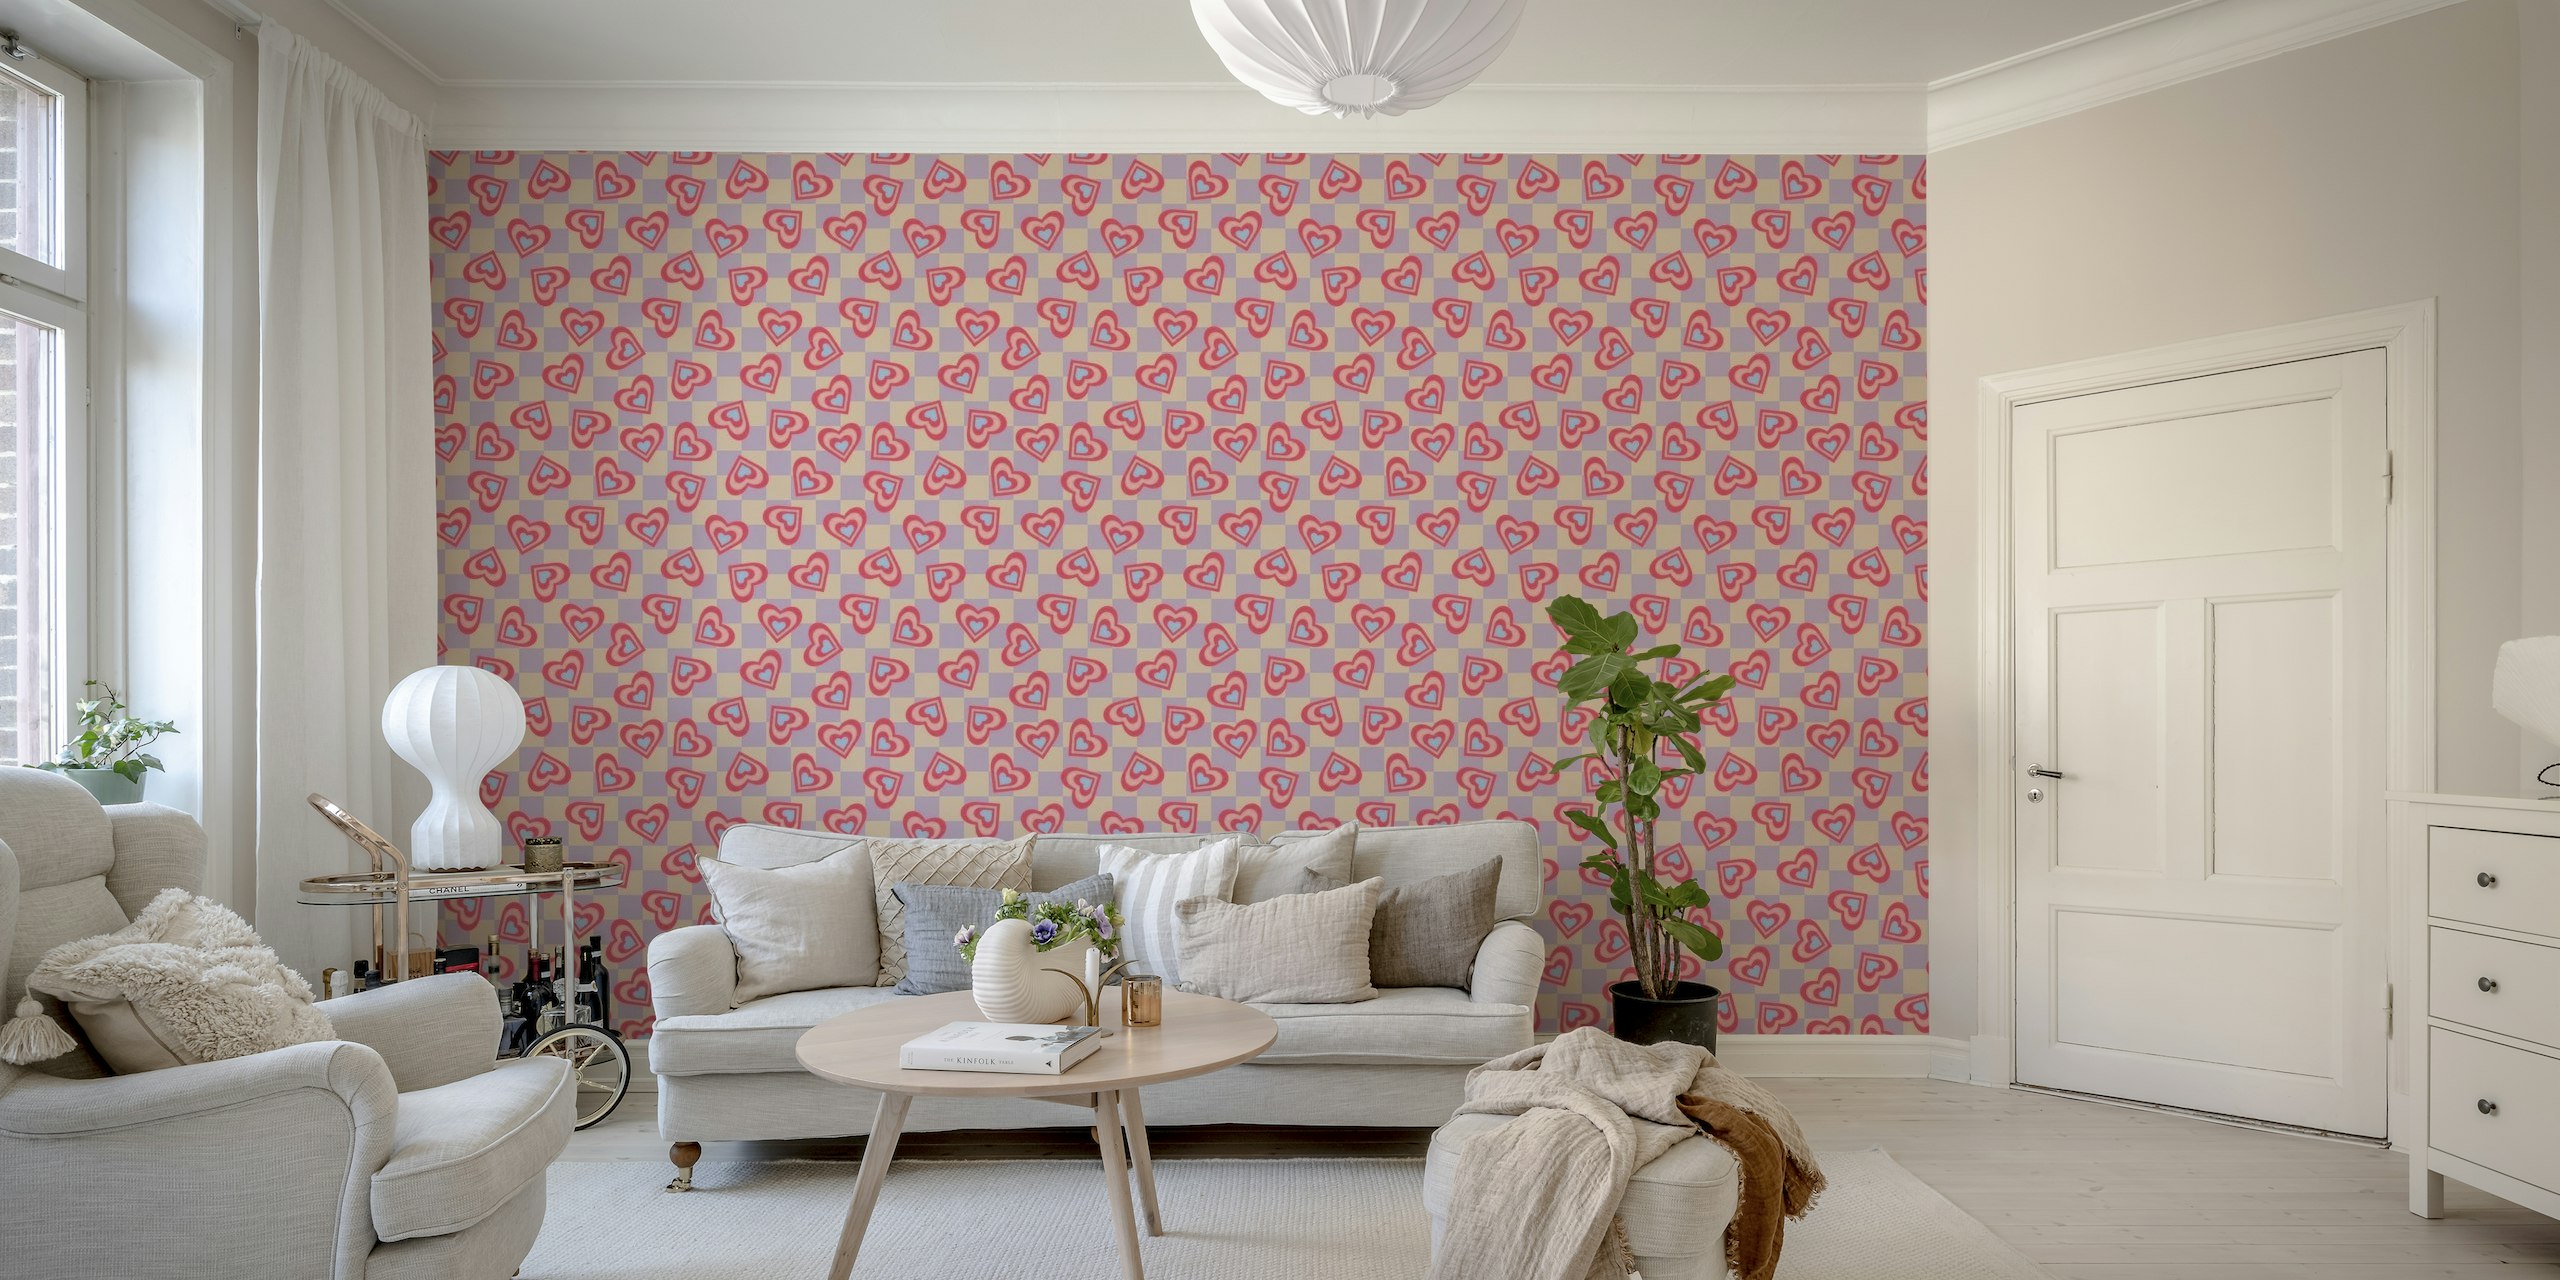 Red, pink, and lavender hearts on a checkerboard pattern wall mural